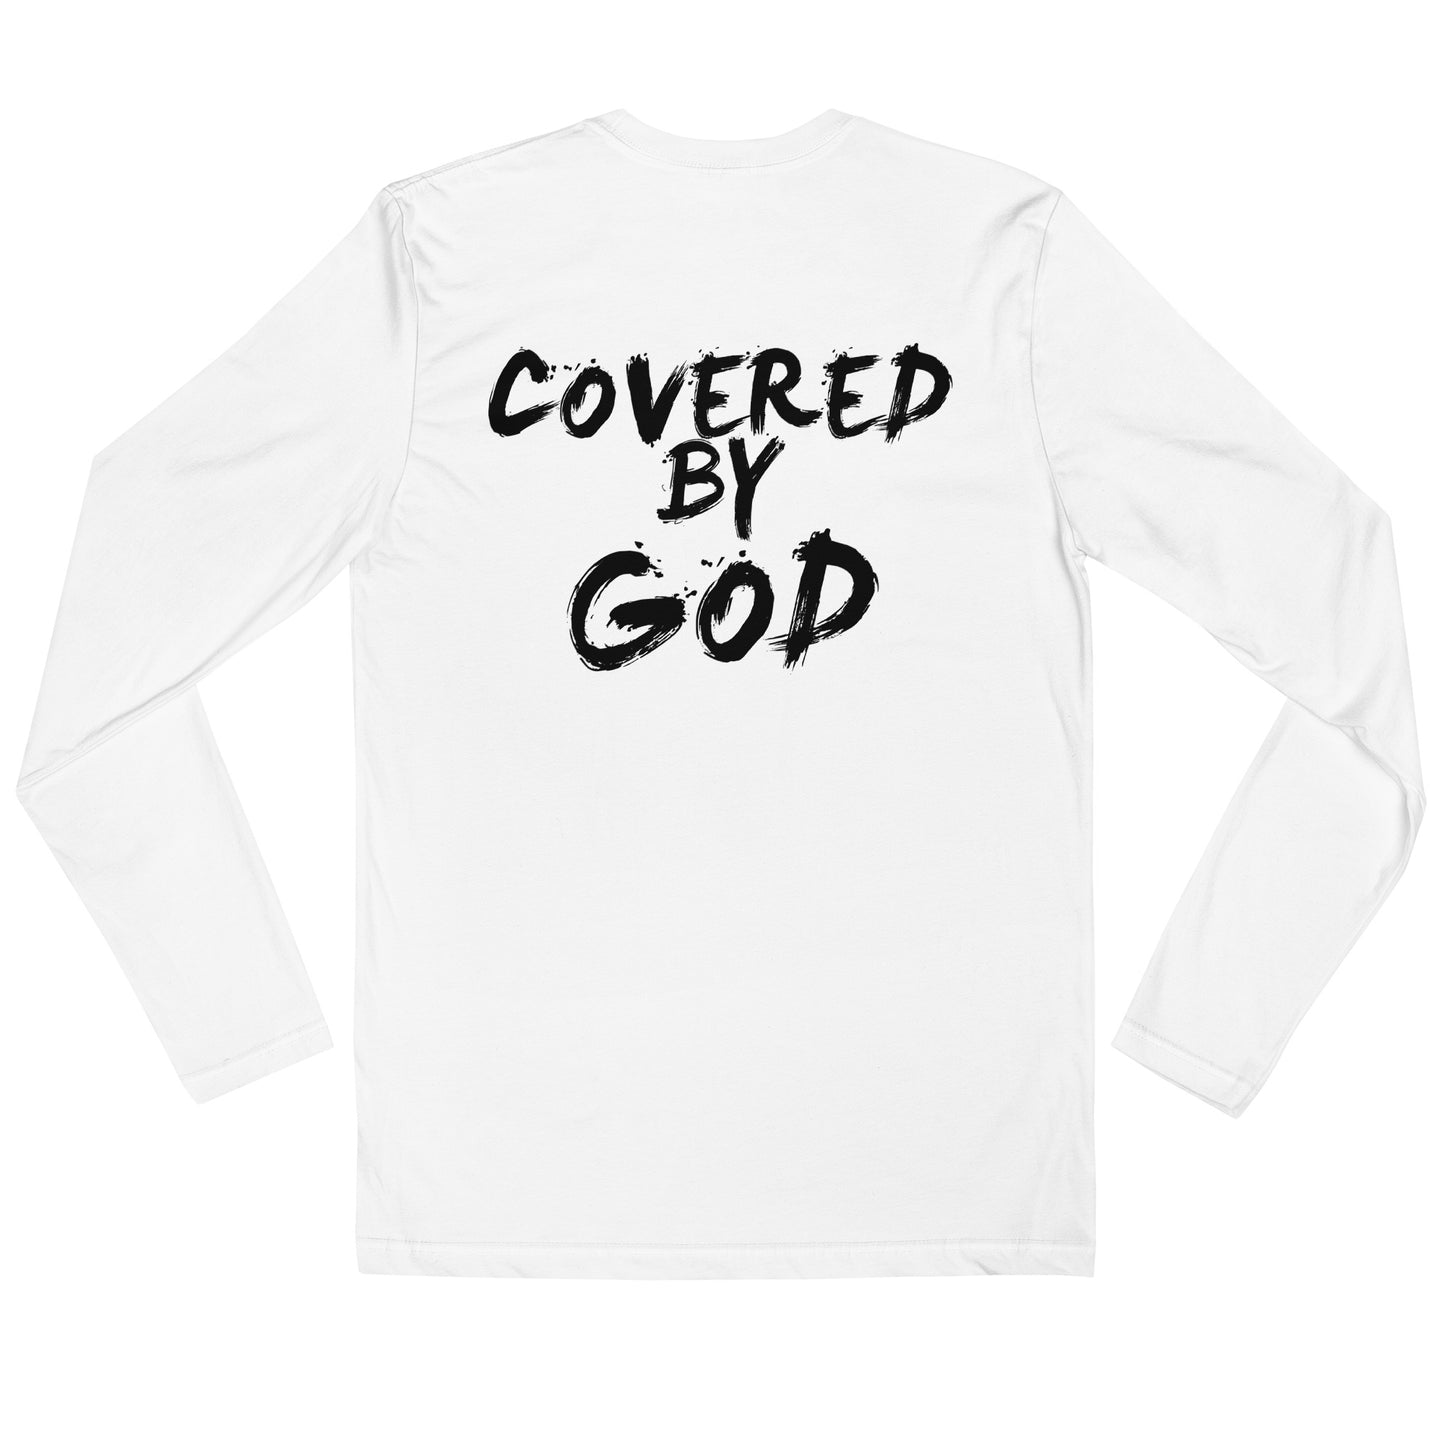 I'm Just Out Here Trusting God Long Sleeve White T-Shirt